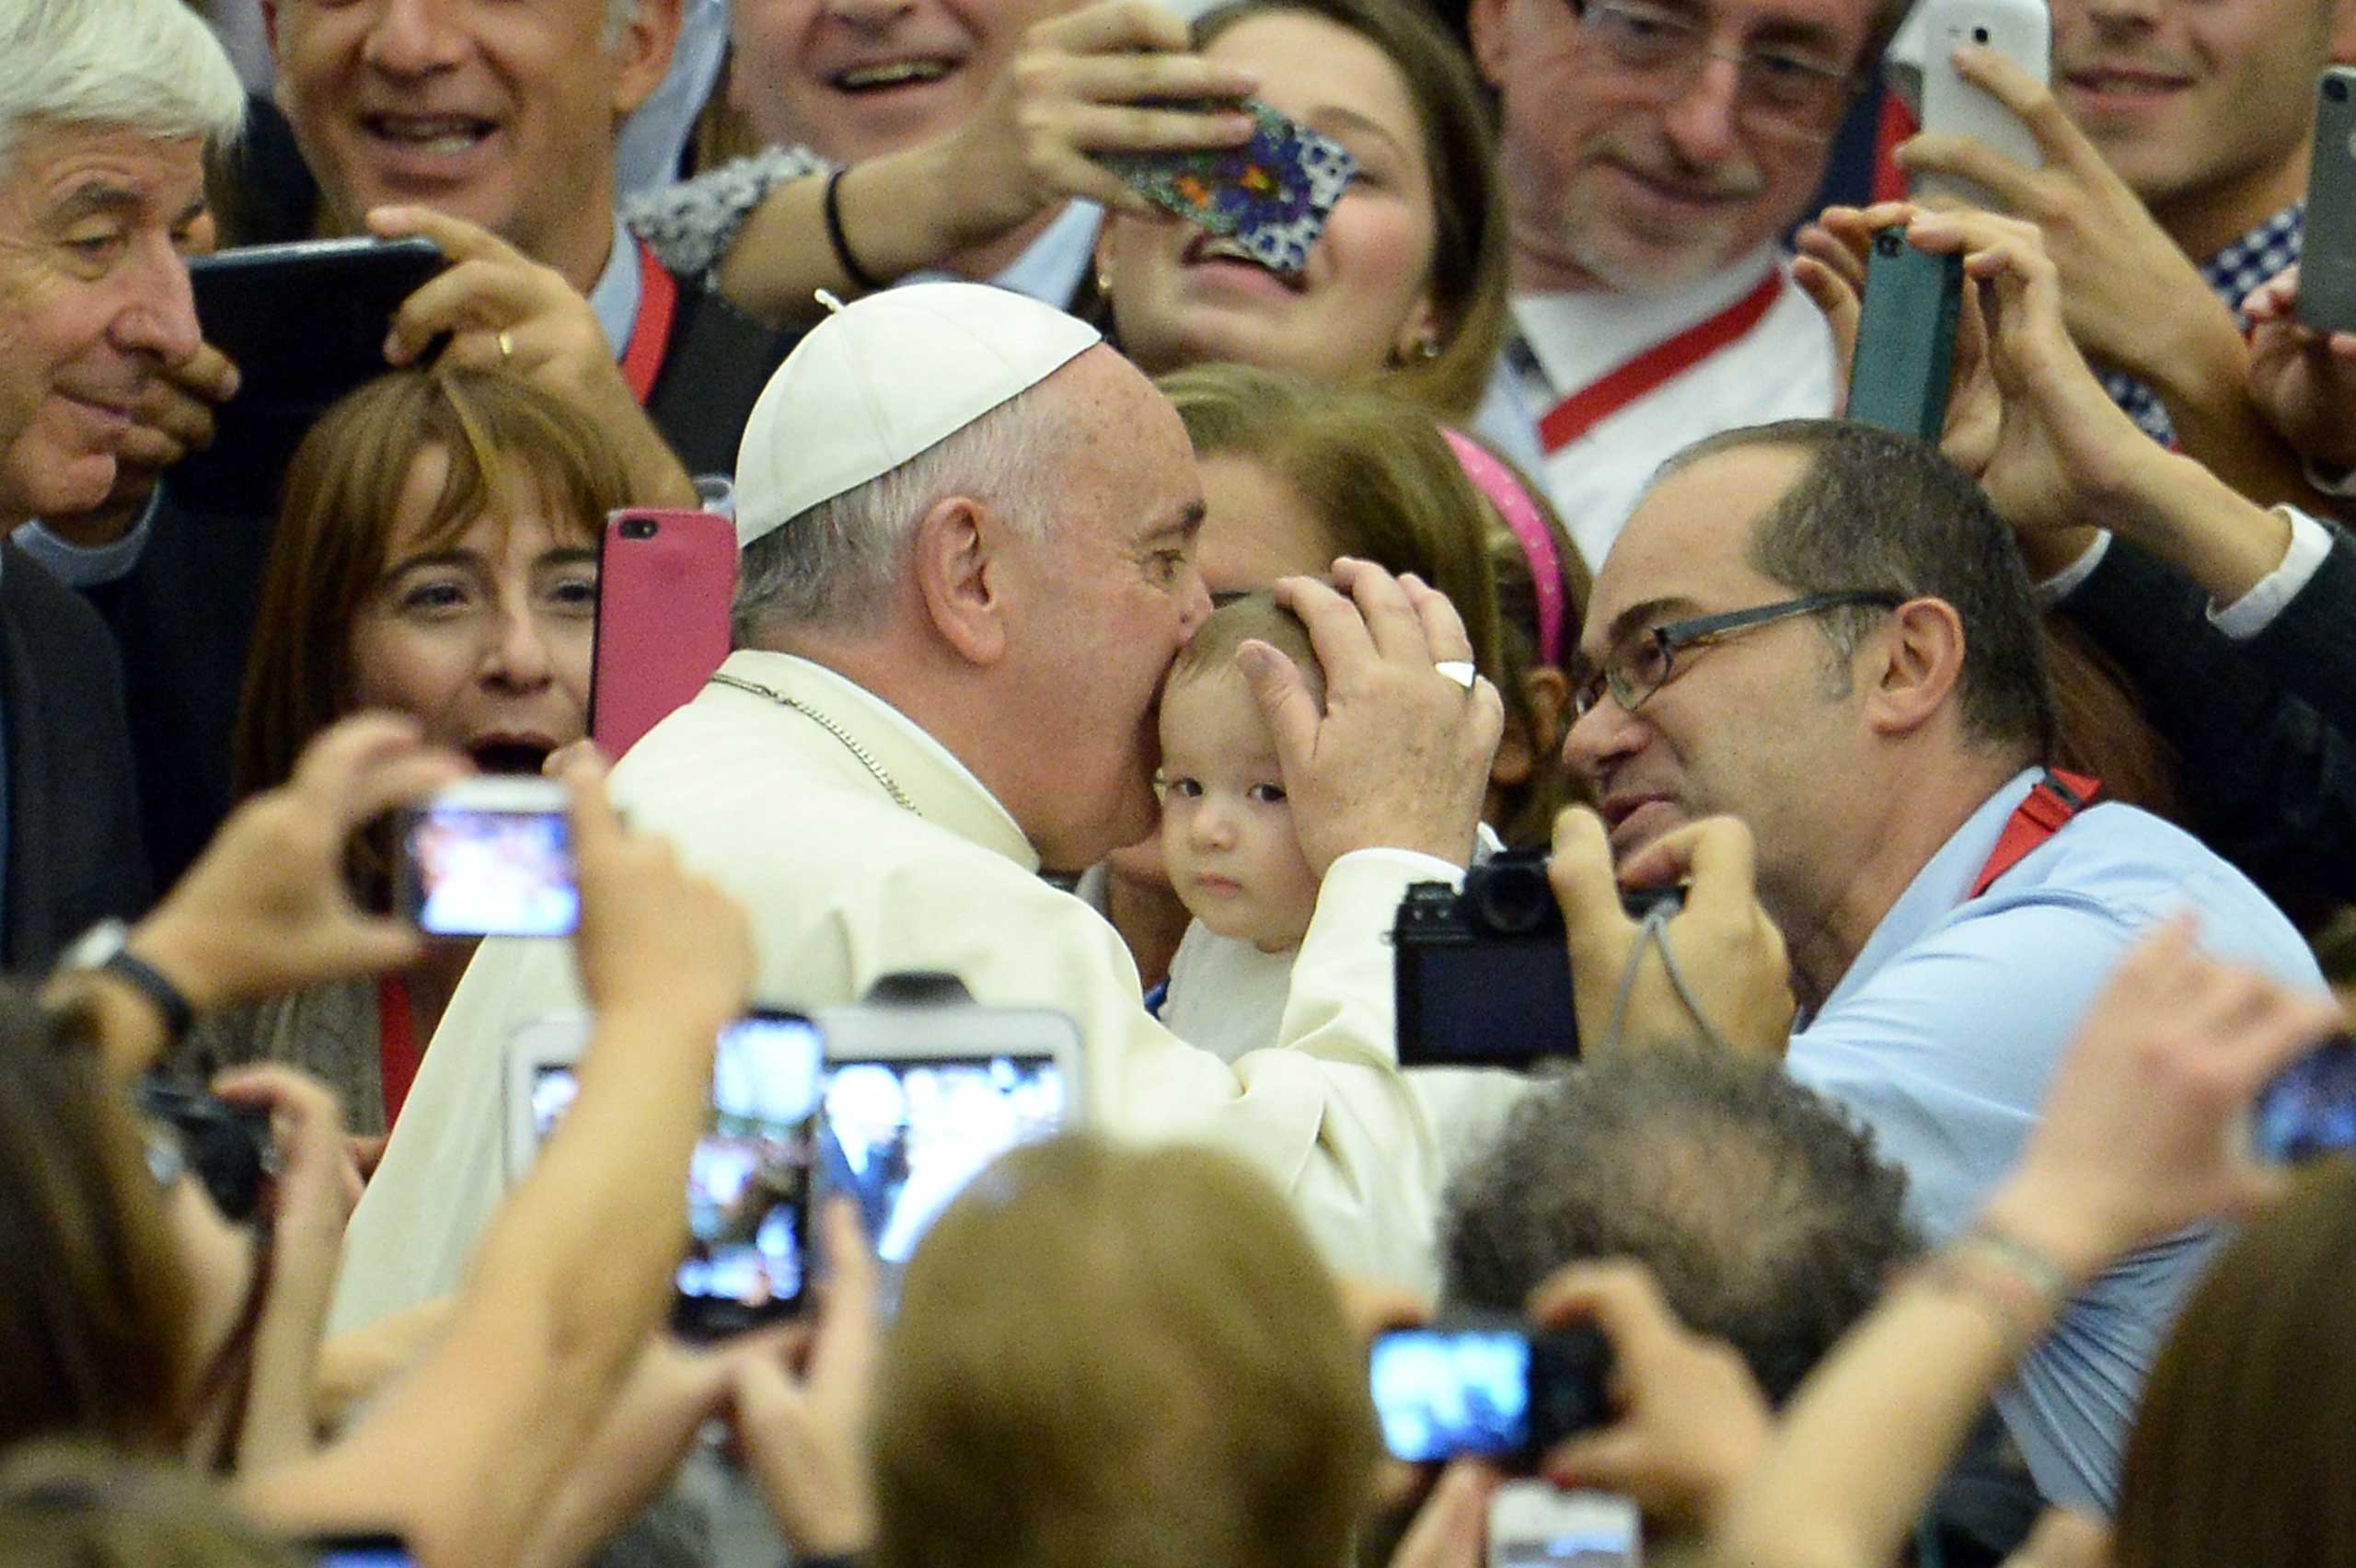 Pope Francis kisses a baby during an audience with members of the Association of Italian Catholic Doctors at Paul VI audience hall at the Vatican on Nov. 15, 2014. (Filippo Monteforte—AFP/Getty Images)